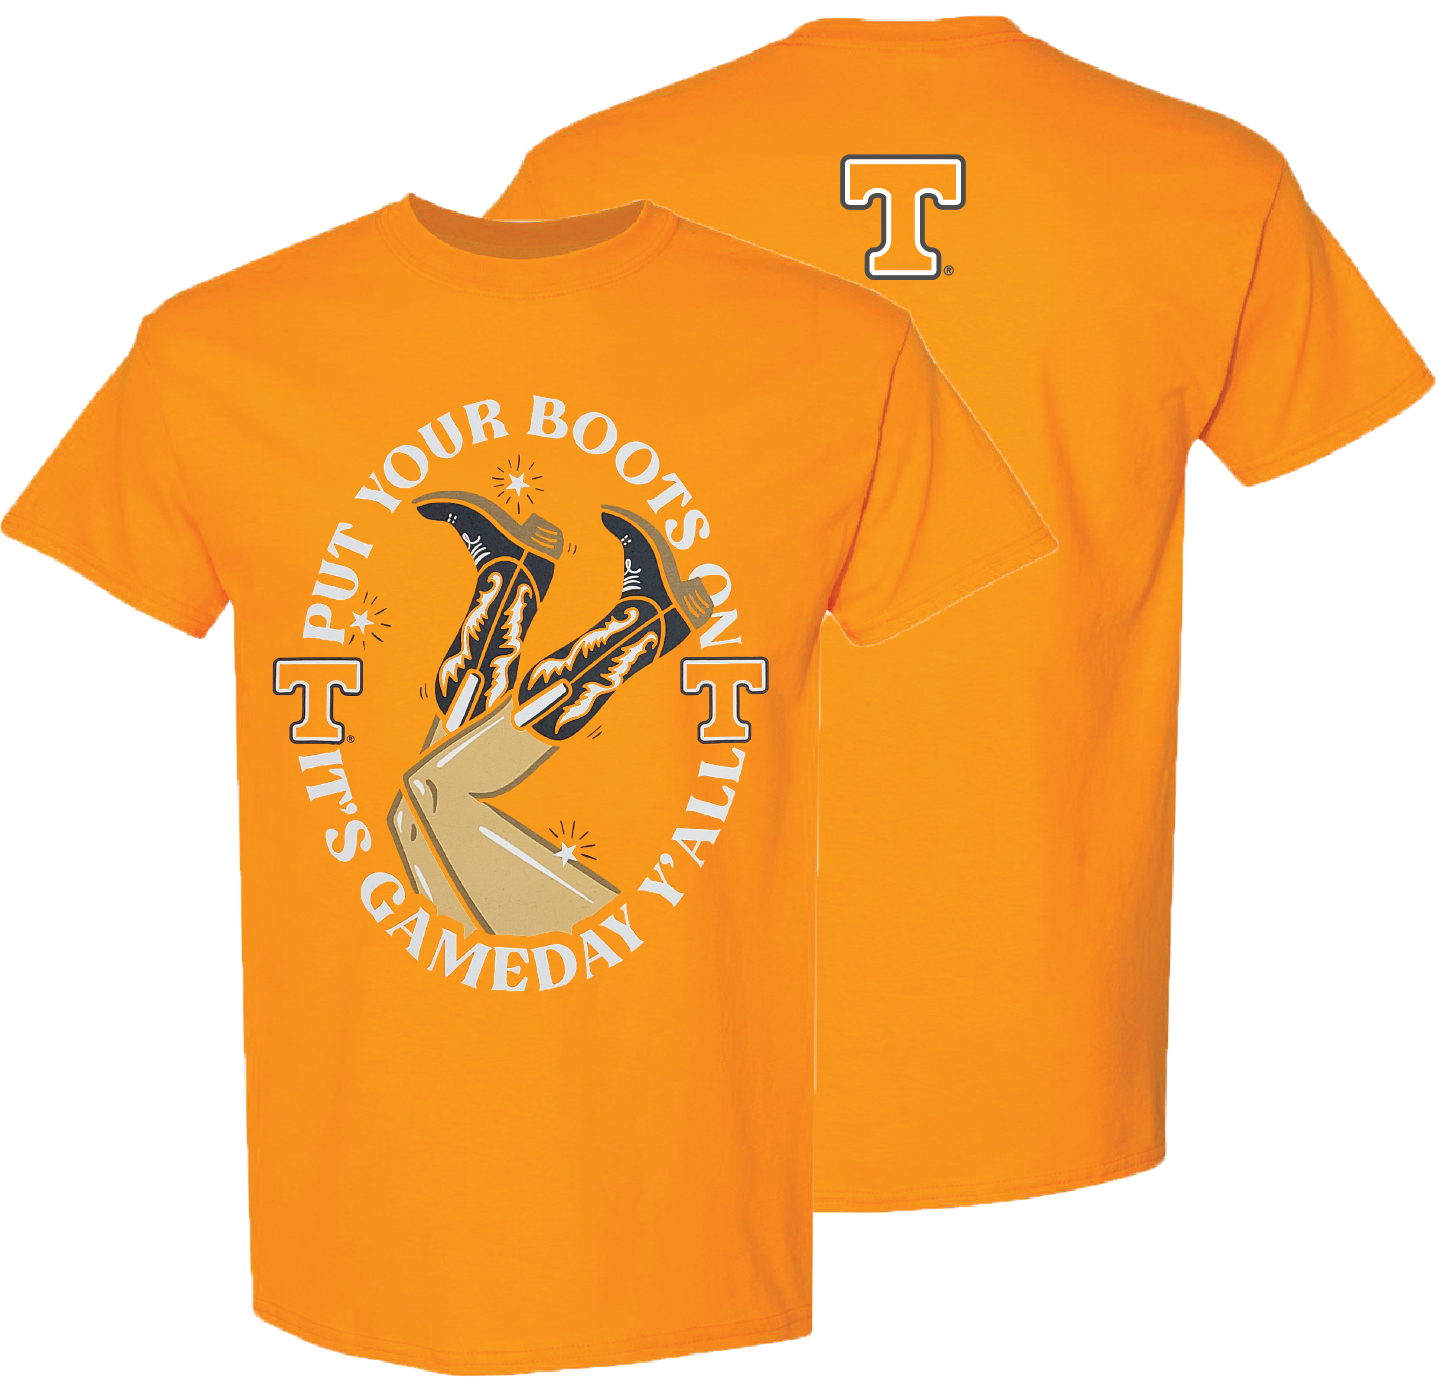 Women's College Shirts - Order Tennessee Tees | Girlie Girl Originals ...